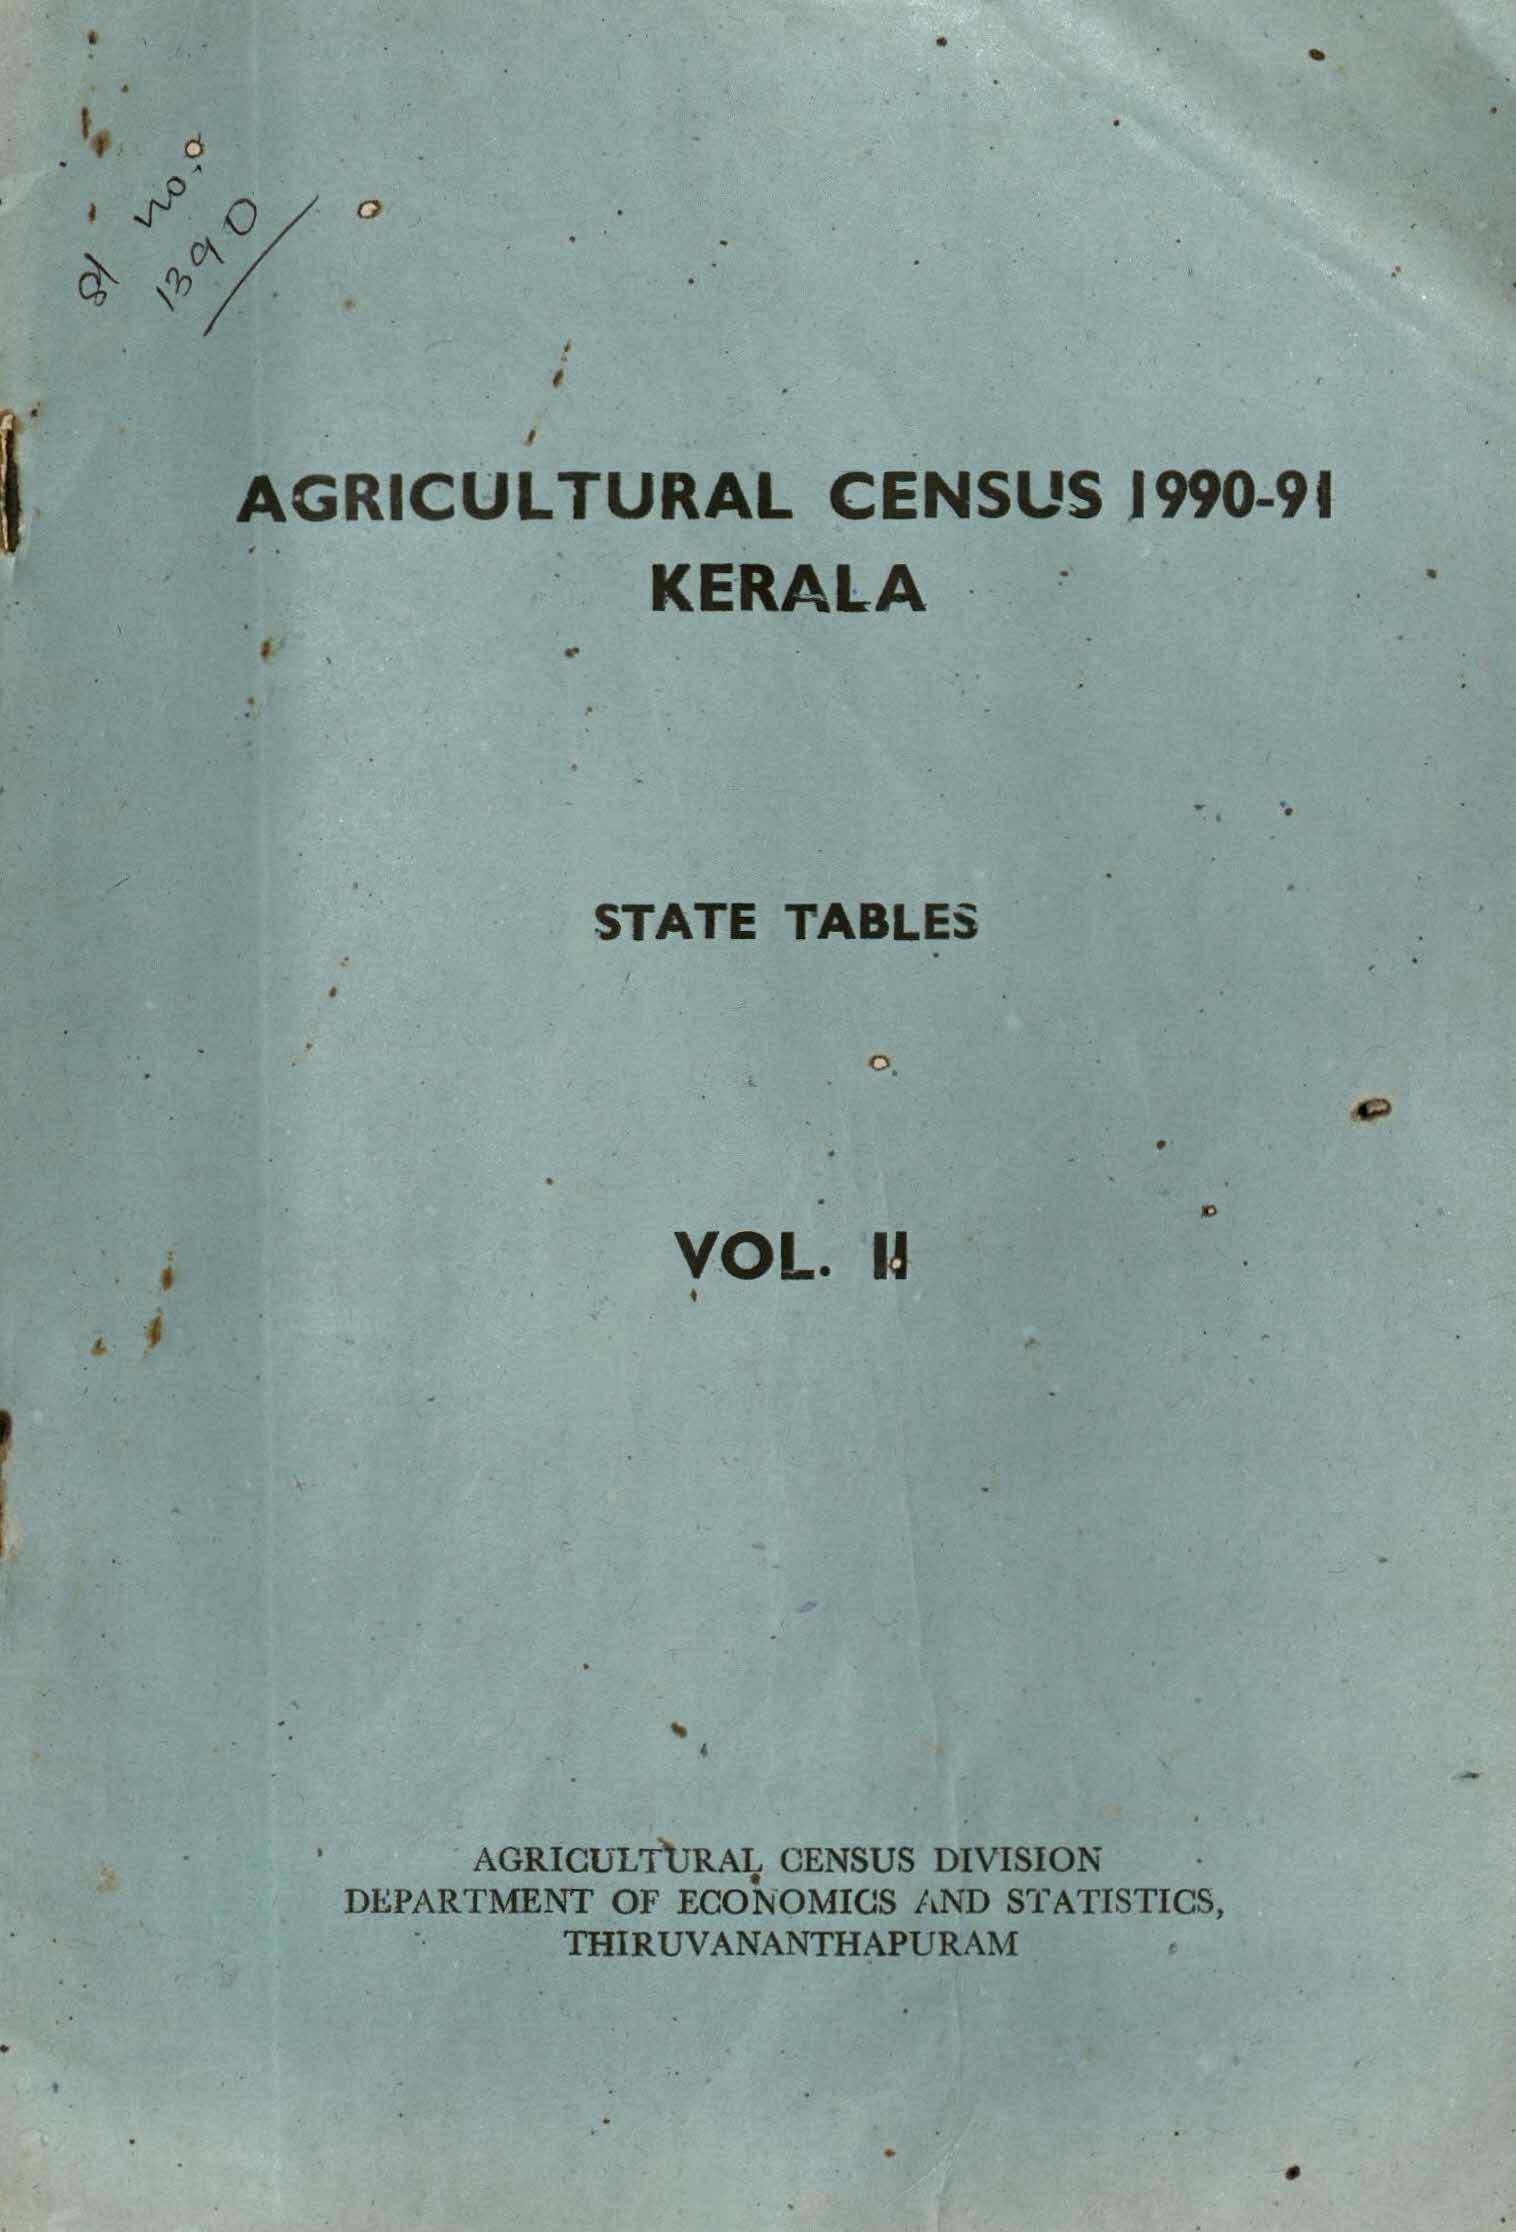 AGRICULTURAL CENSUS 1990-91